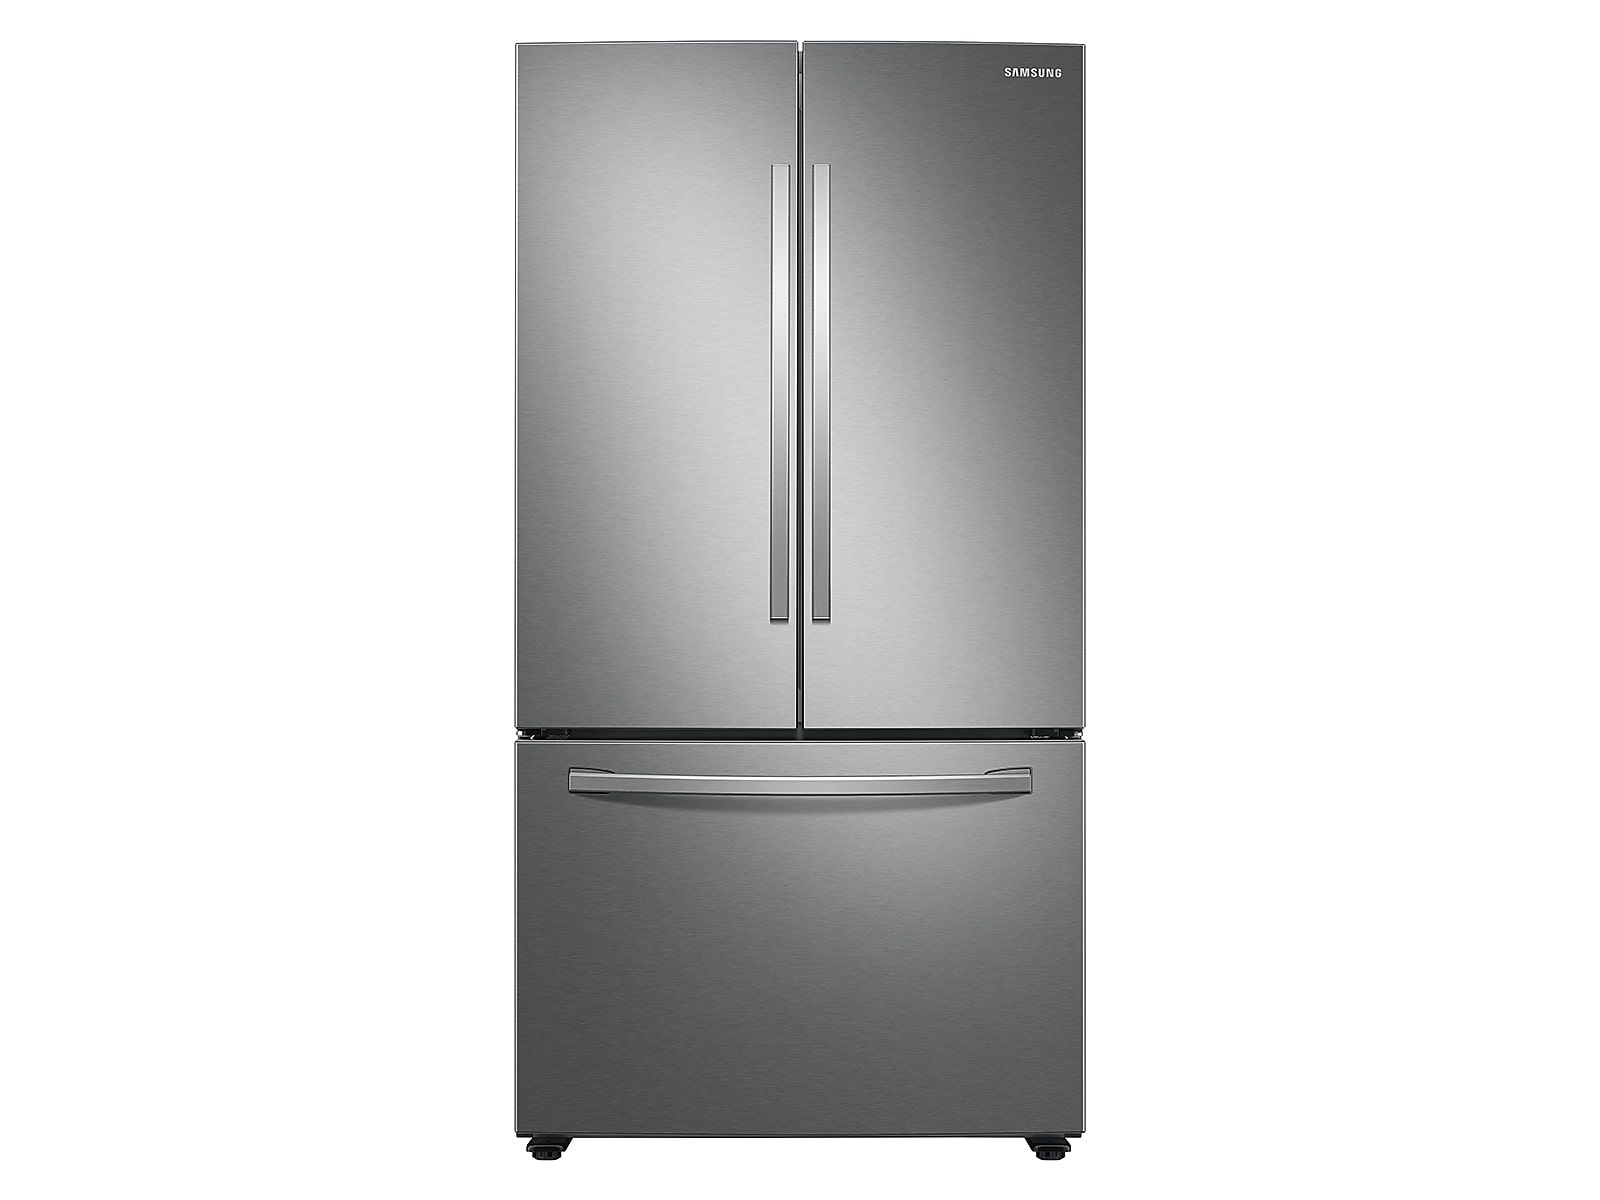 Samsung 28 cu. ft. Large Capacity 3-Door French Door Refrigerator with AutoFill Water Pitcher in Silver(RF28T5021SR/AA)